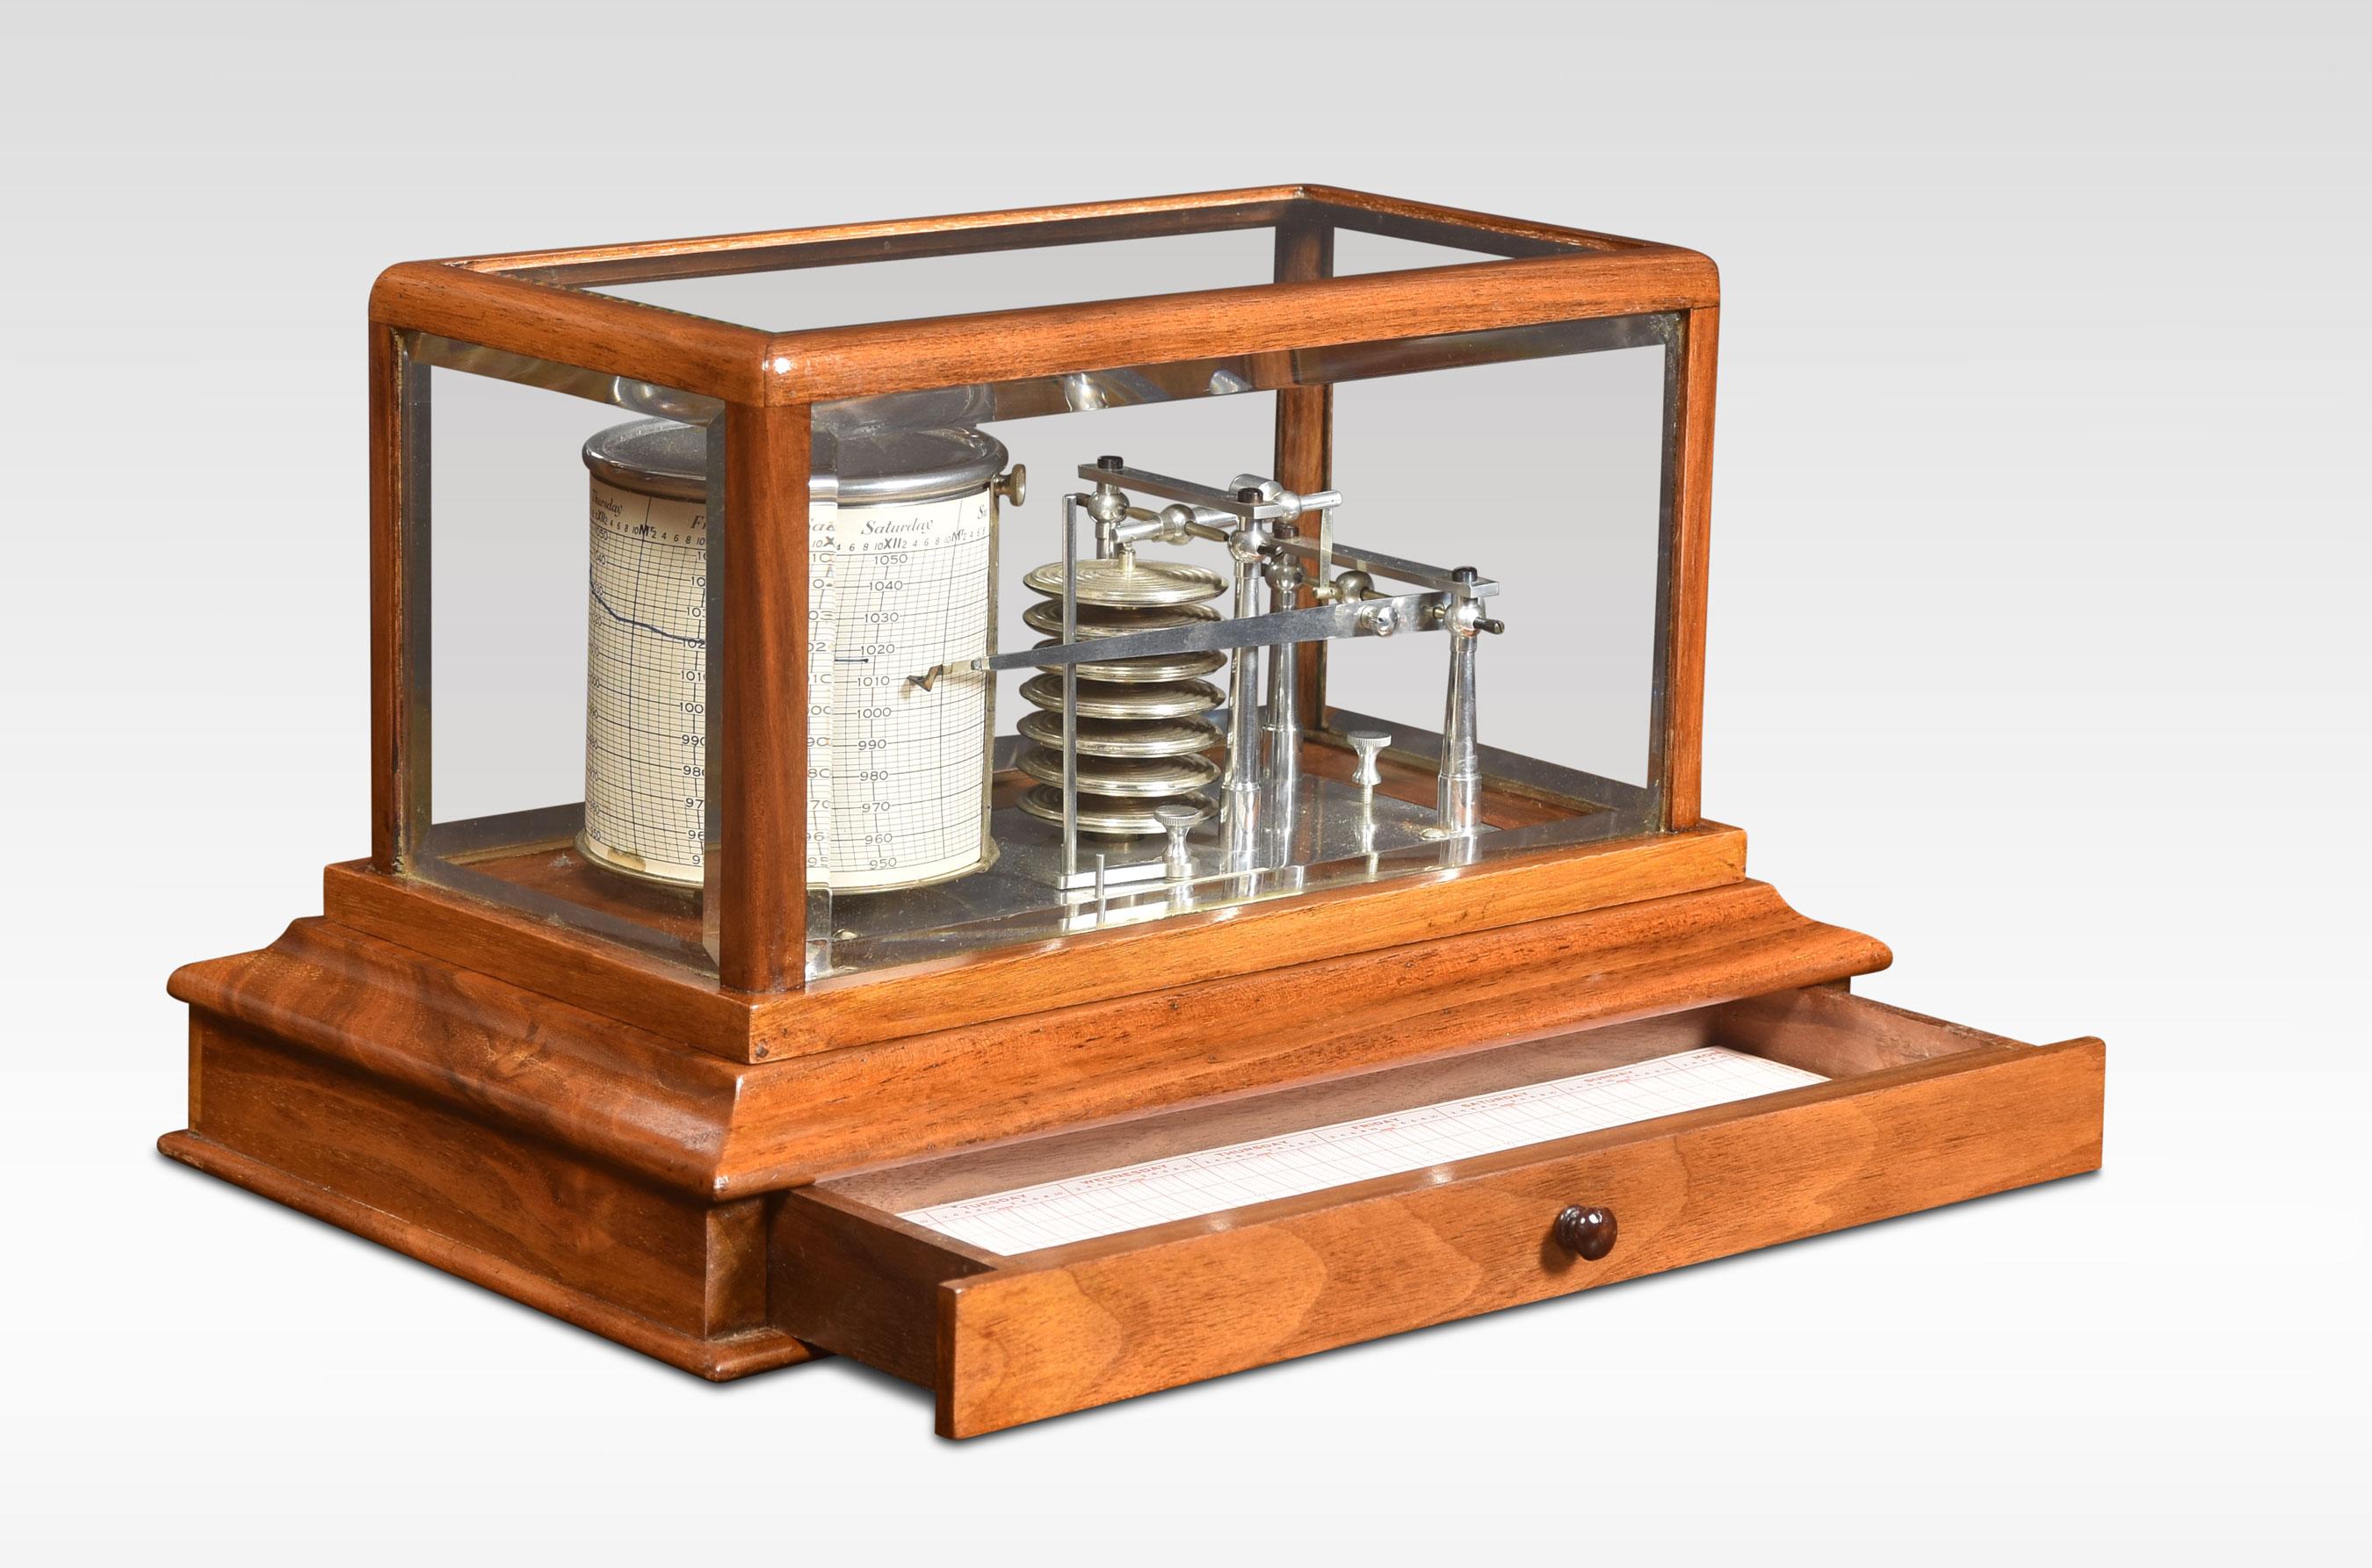 XJohn Trotter walnut-cased Barograph, having five beveled glazed removable lid, and a drawer below to house the charts. The mechanical eight-day movement is housed in the drum, fitted with a seven-day chart that covers one full rotation of the drum.